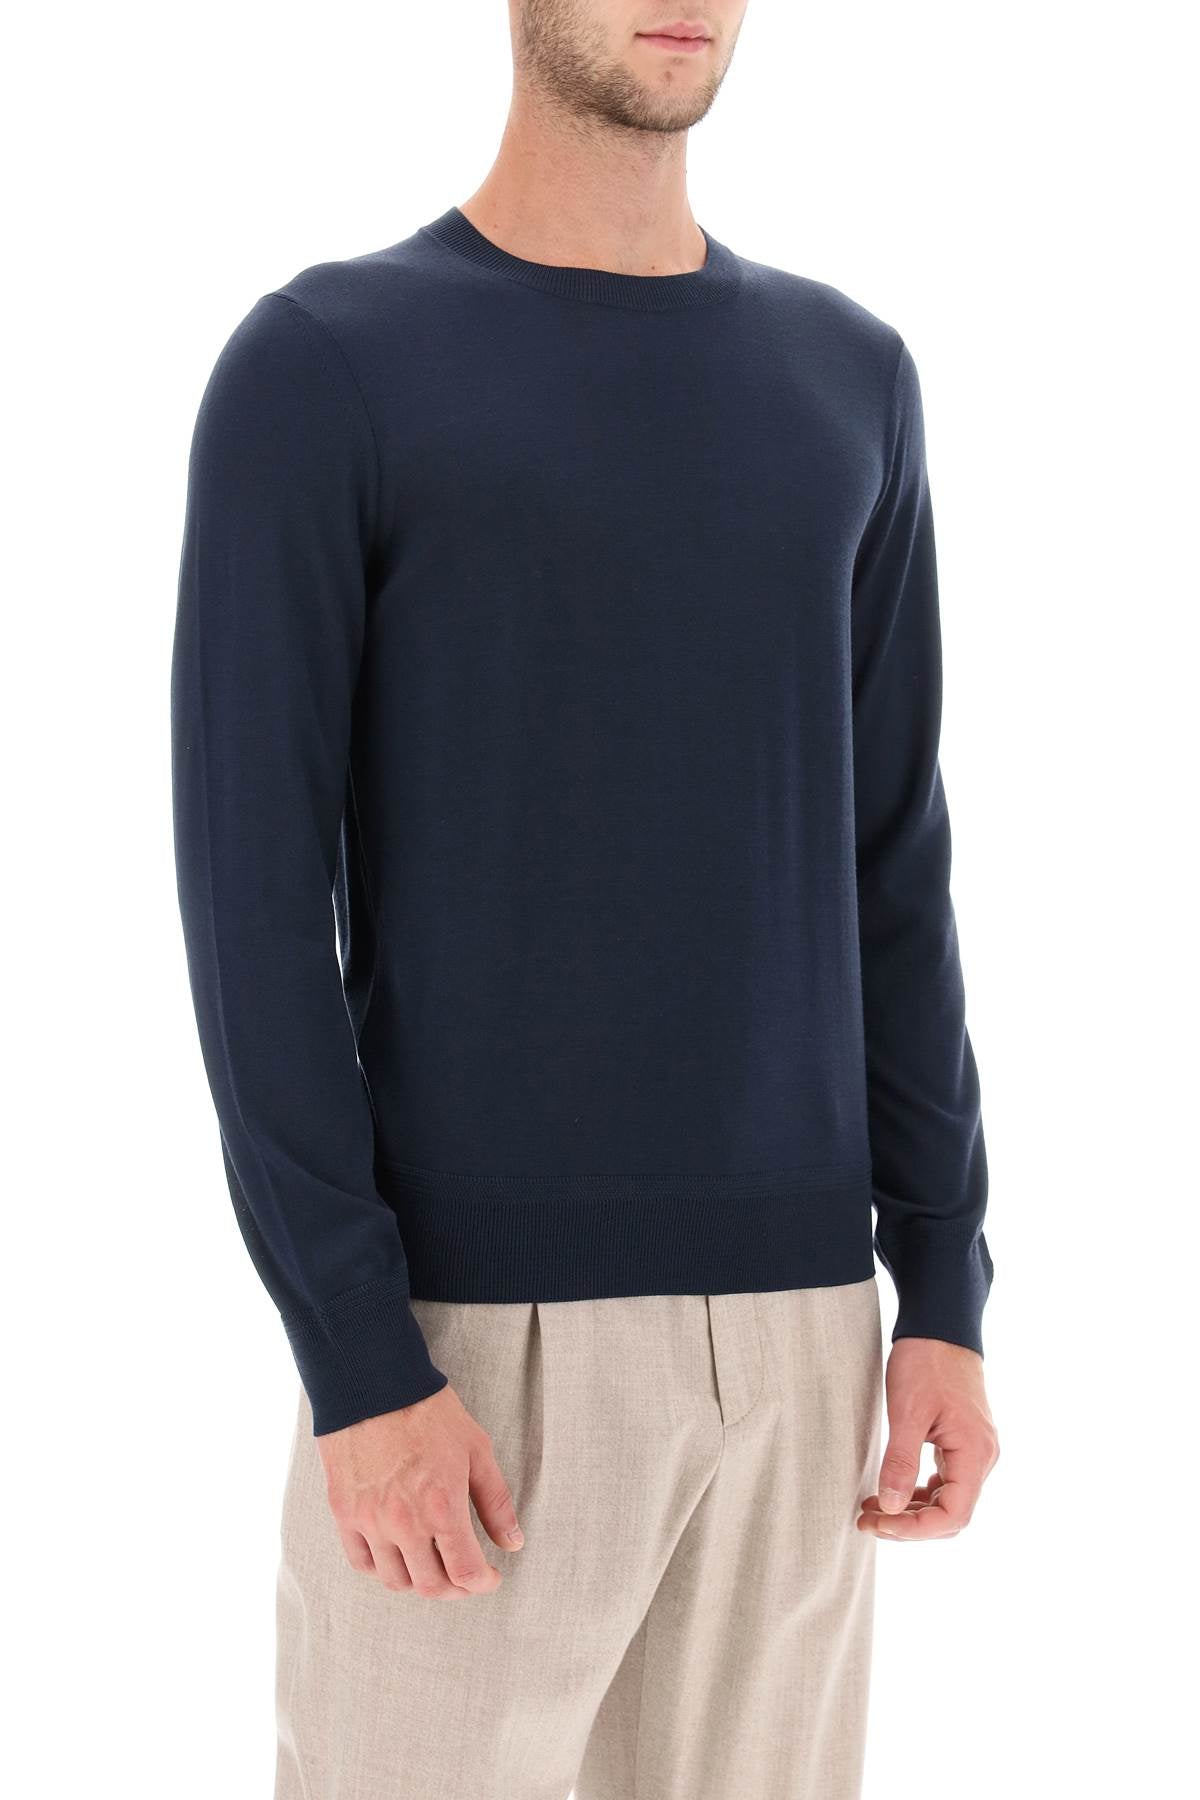 TOM FORD Luxurious Fine Wool Sweater for Men - Lightweight Crew Neck in Blue